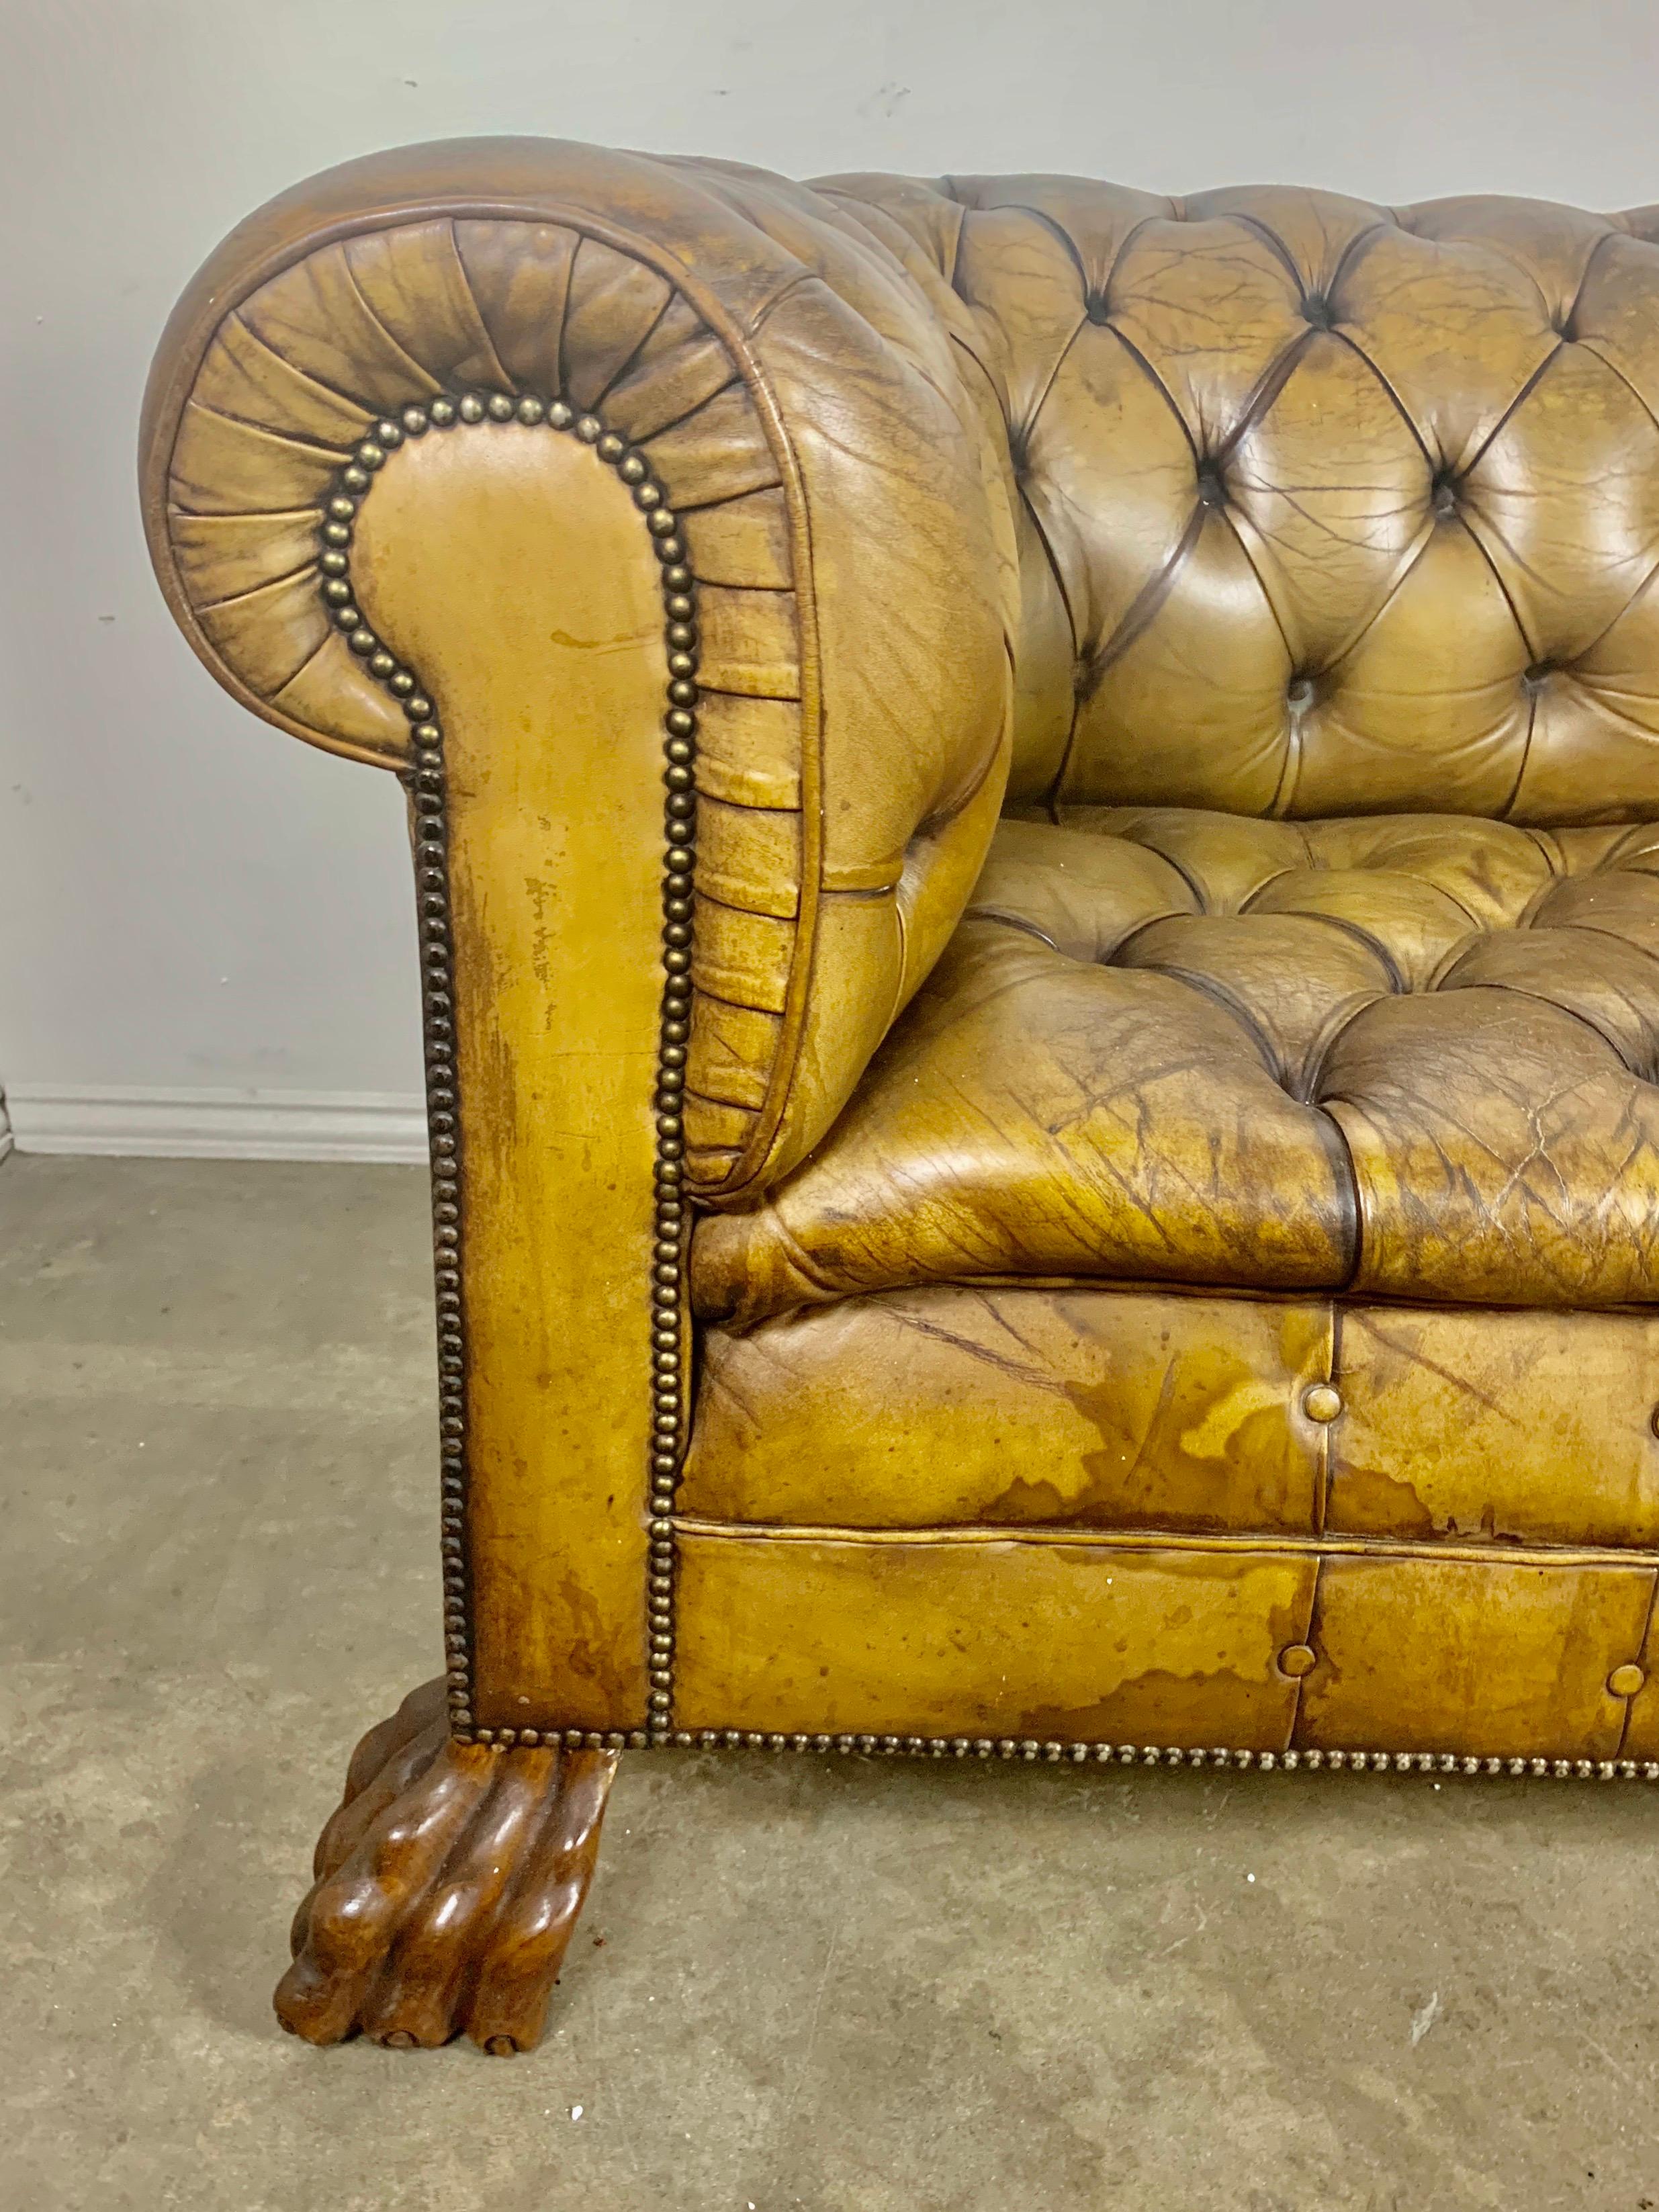 Hand-Carved English Leather Tufted Chesterfield Sofa, circa 1900s